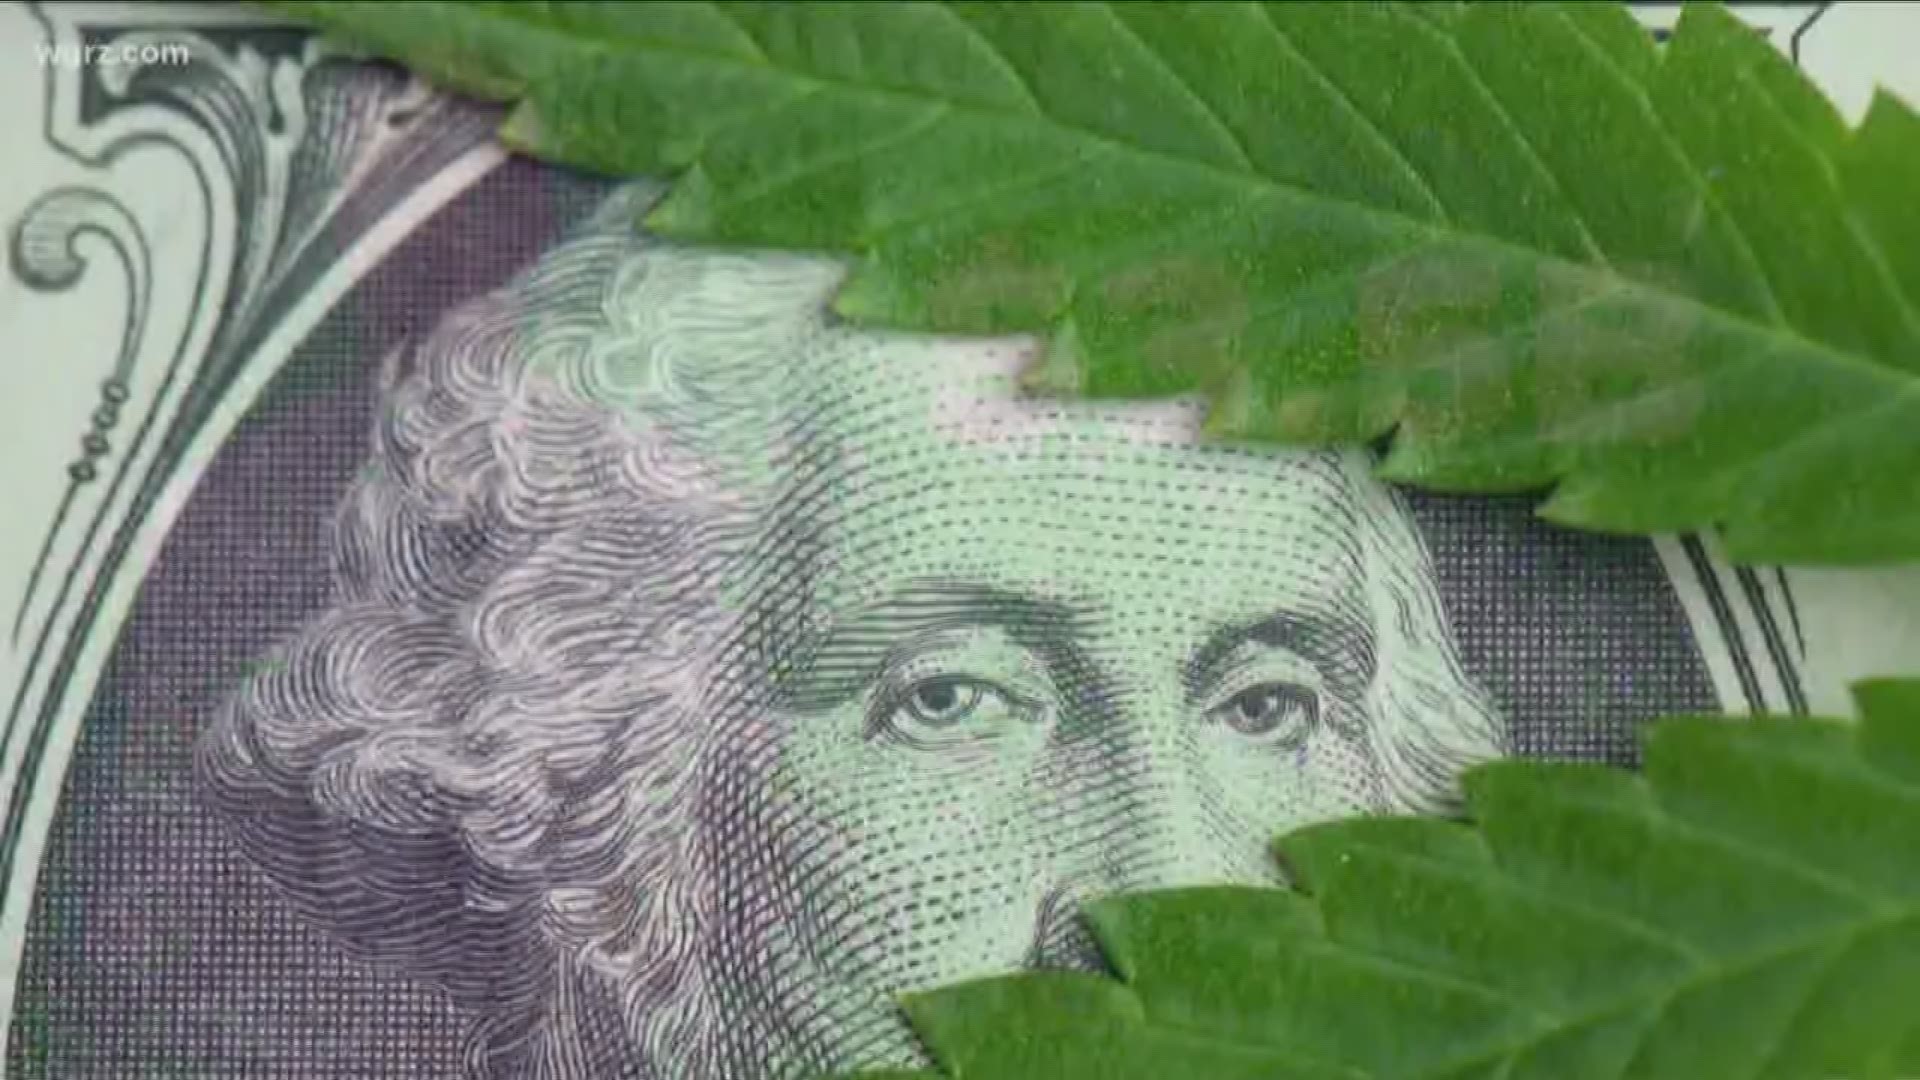 Report: NY State could bring in big money with legal recreational marijuana